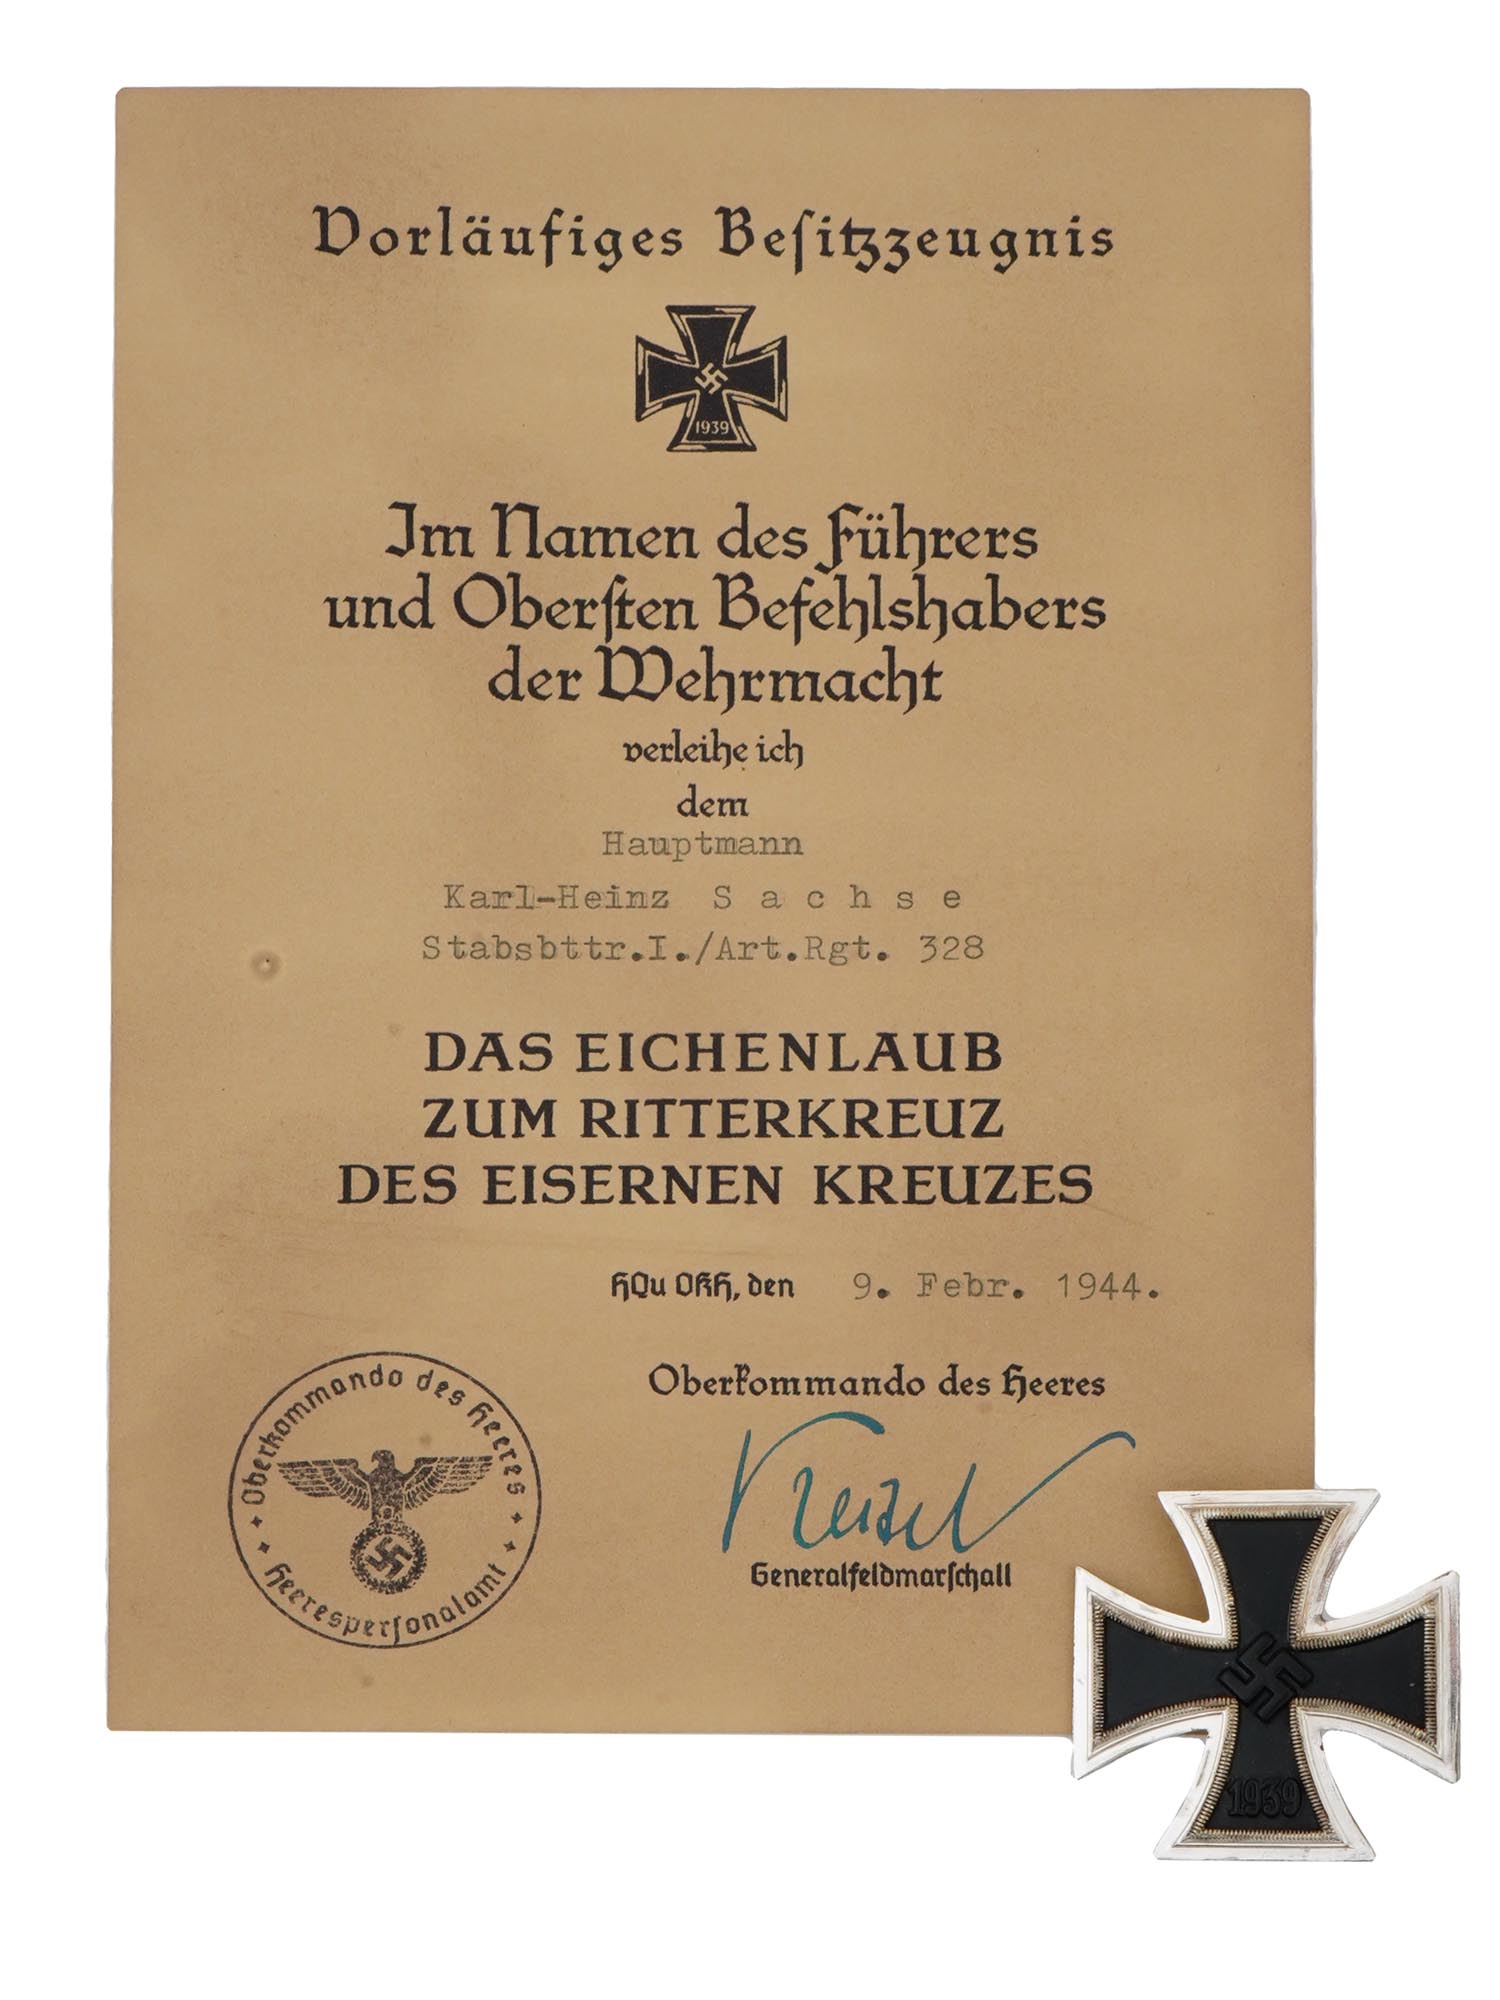 GERMAN WWII KNIGHTS CROSS MEDAL WITH CERTIFICATE PIC-0